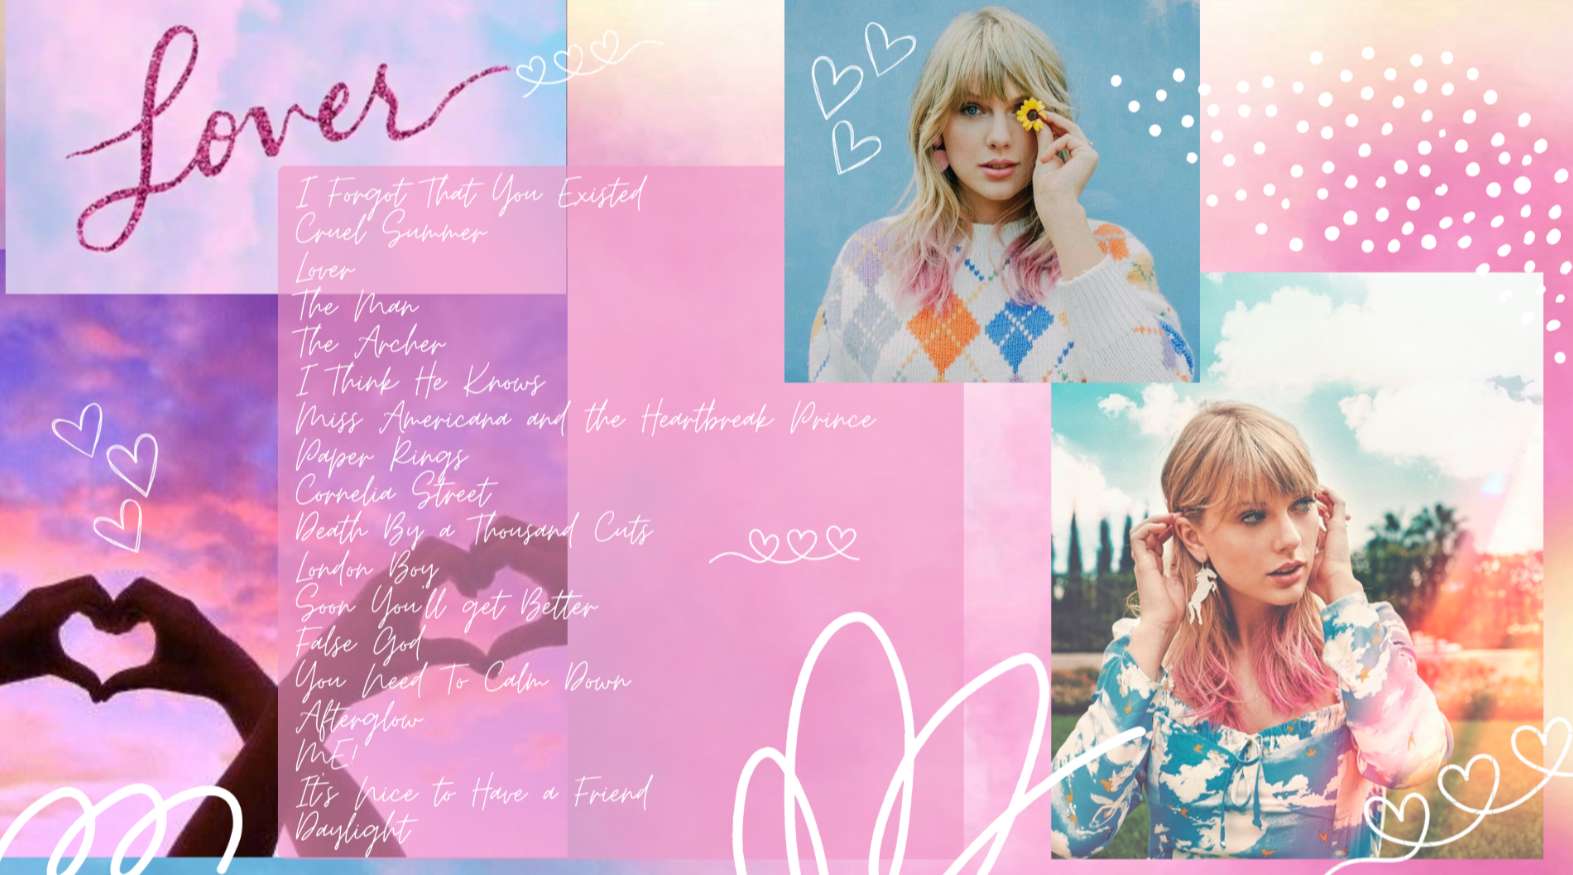 Taylor Swift Lover era collage puzzle online from photo